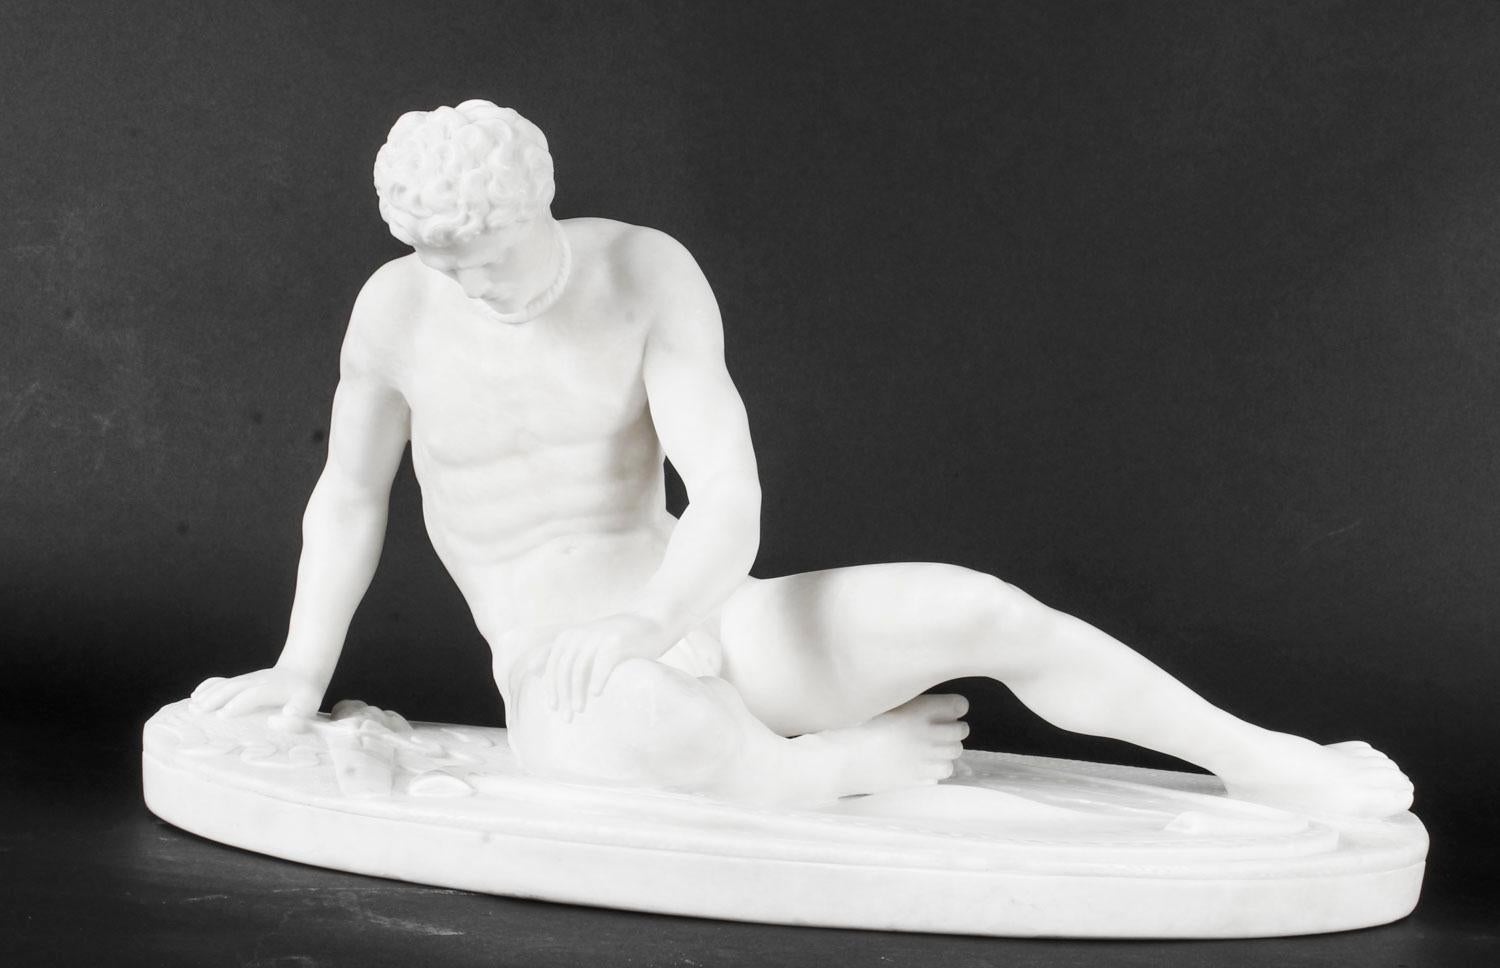 This is a truly magnificent antique Italian Grand Tour white alabaster sculpture of the Dying Gaul, circa 1860 in date. 

This striking classical sculpture is after the original antique Roman marble sculpture found in the Capitoline Museum in the